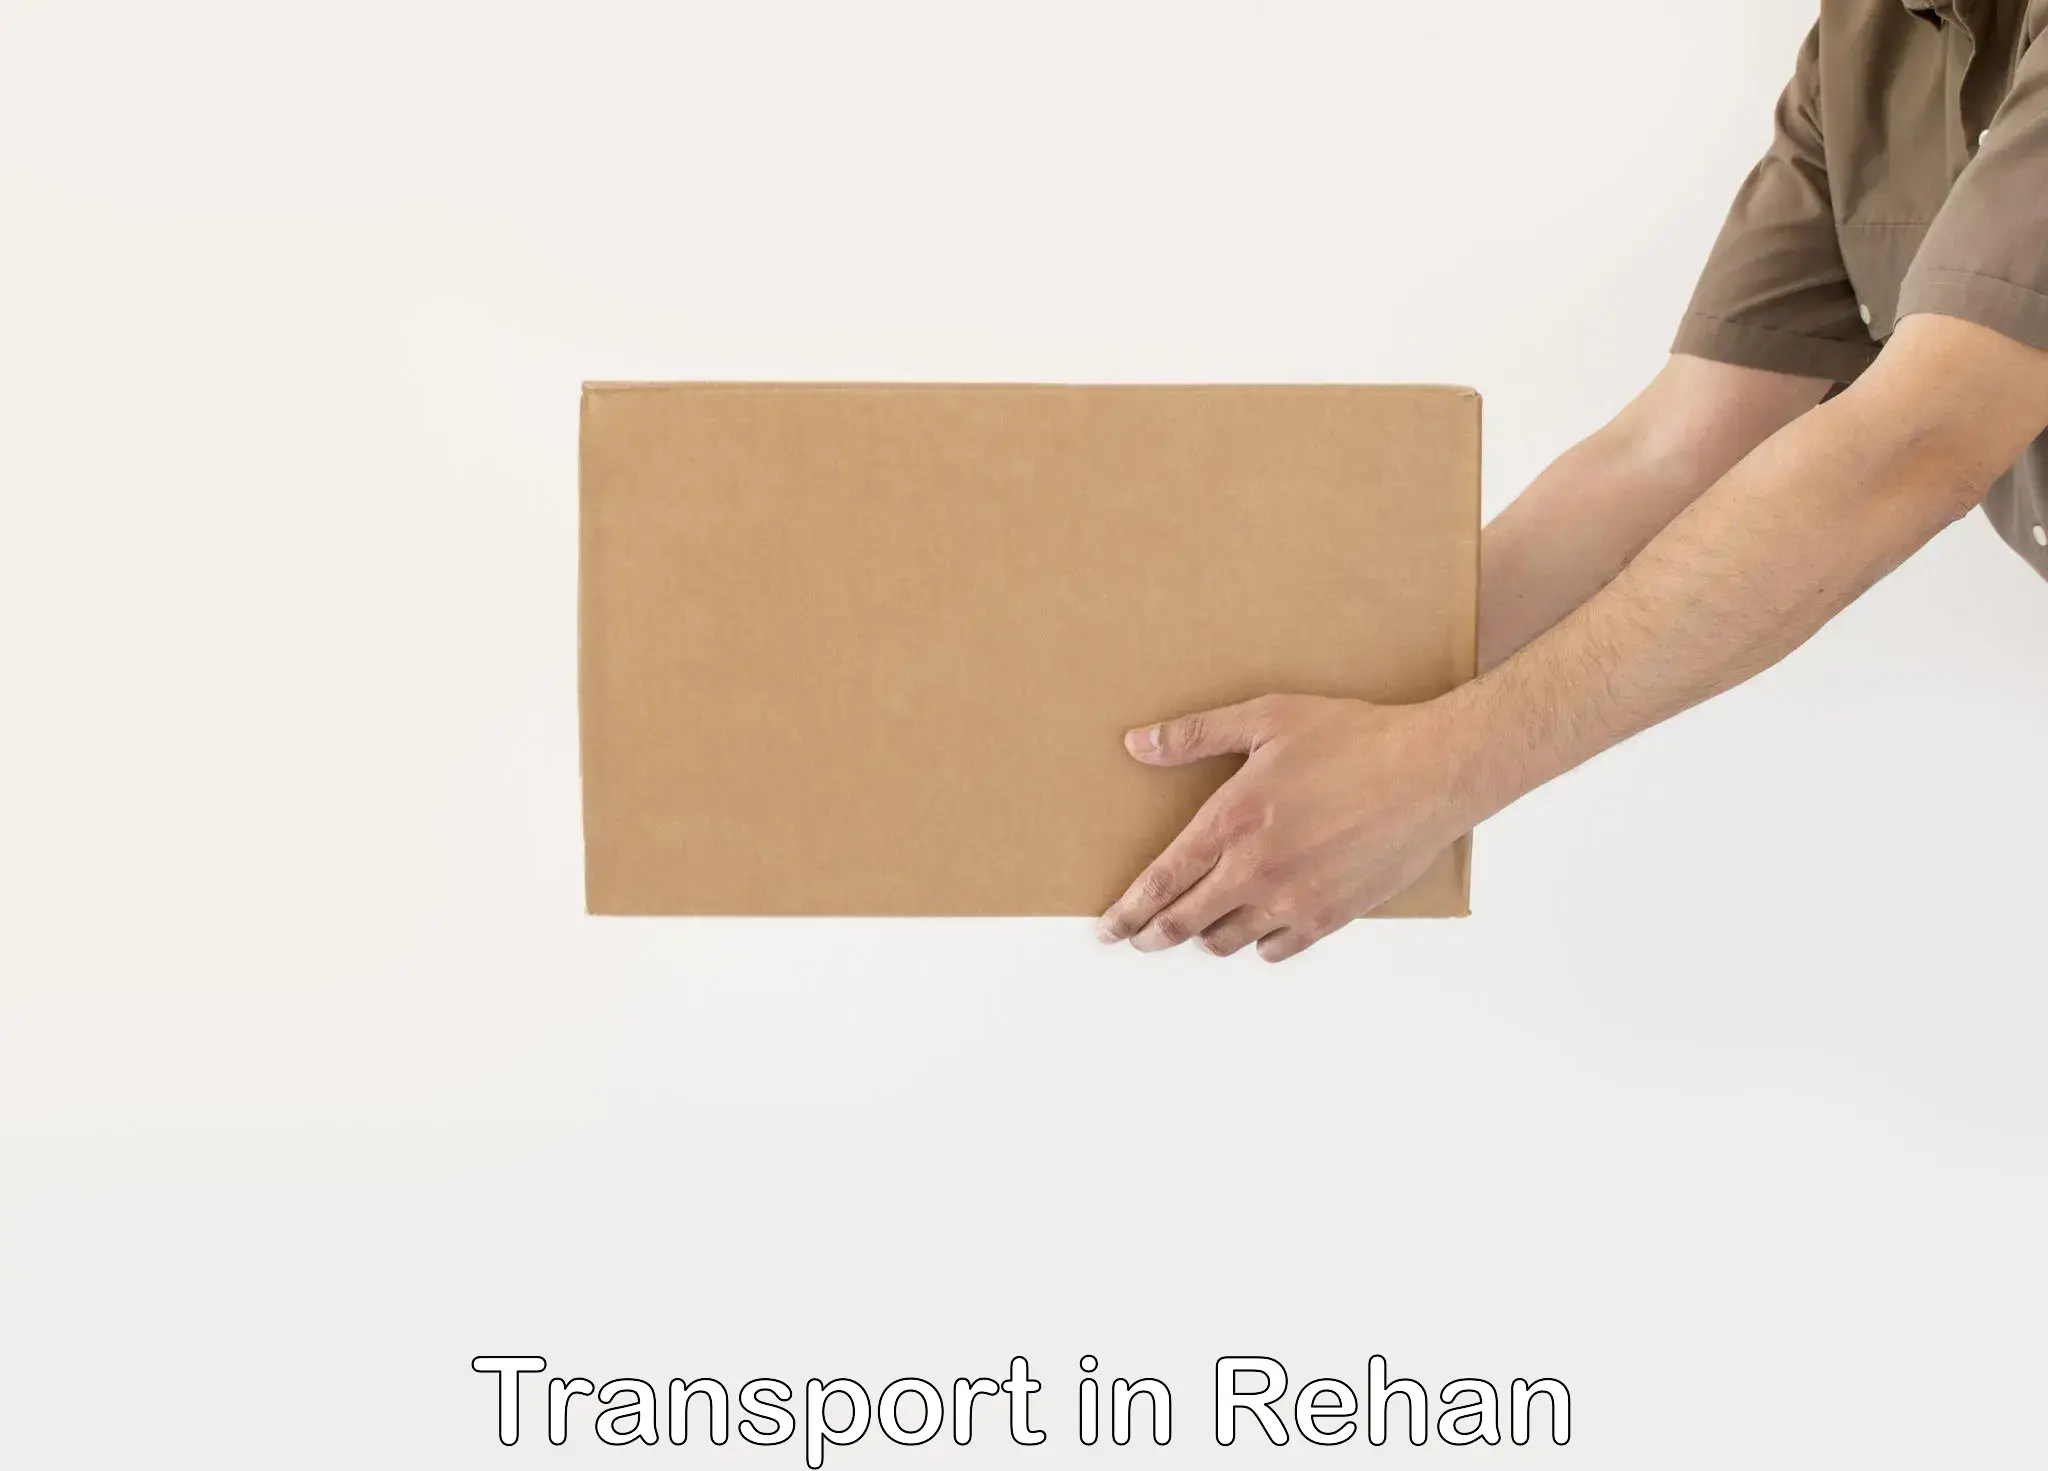 Container transport service in Rehan